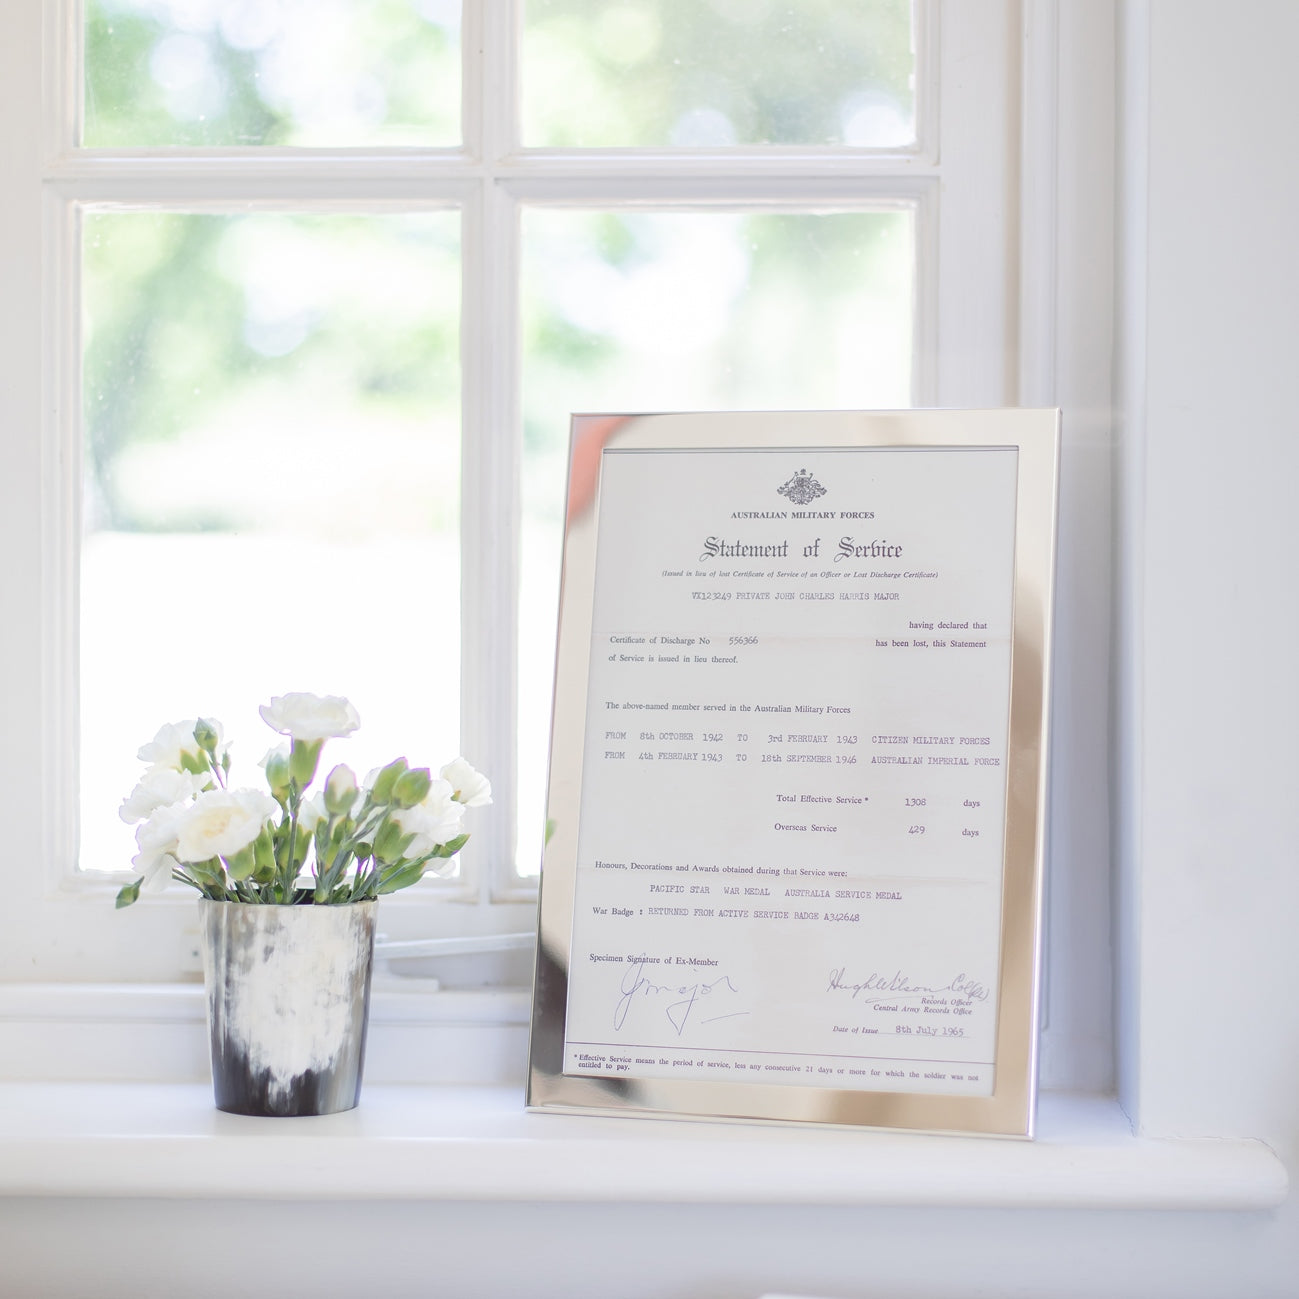 Silver Plated Certificate Frame